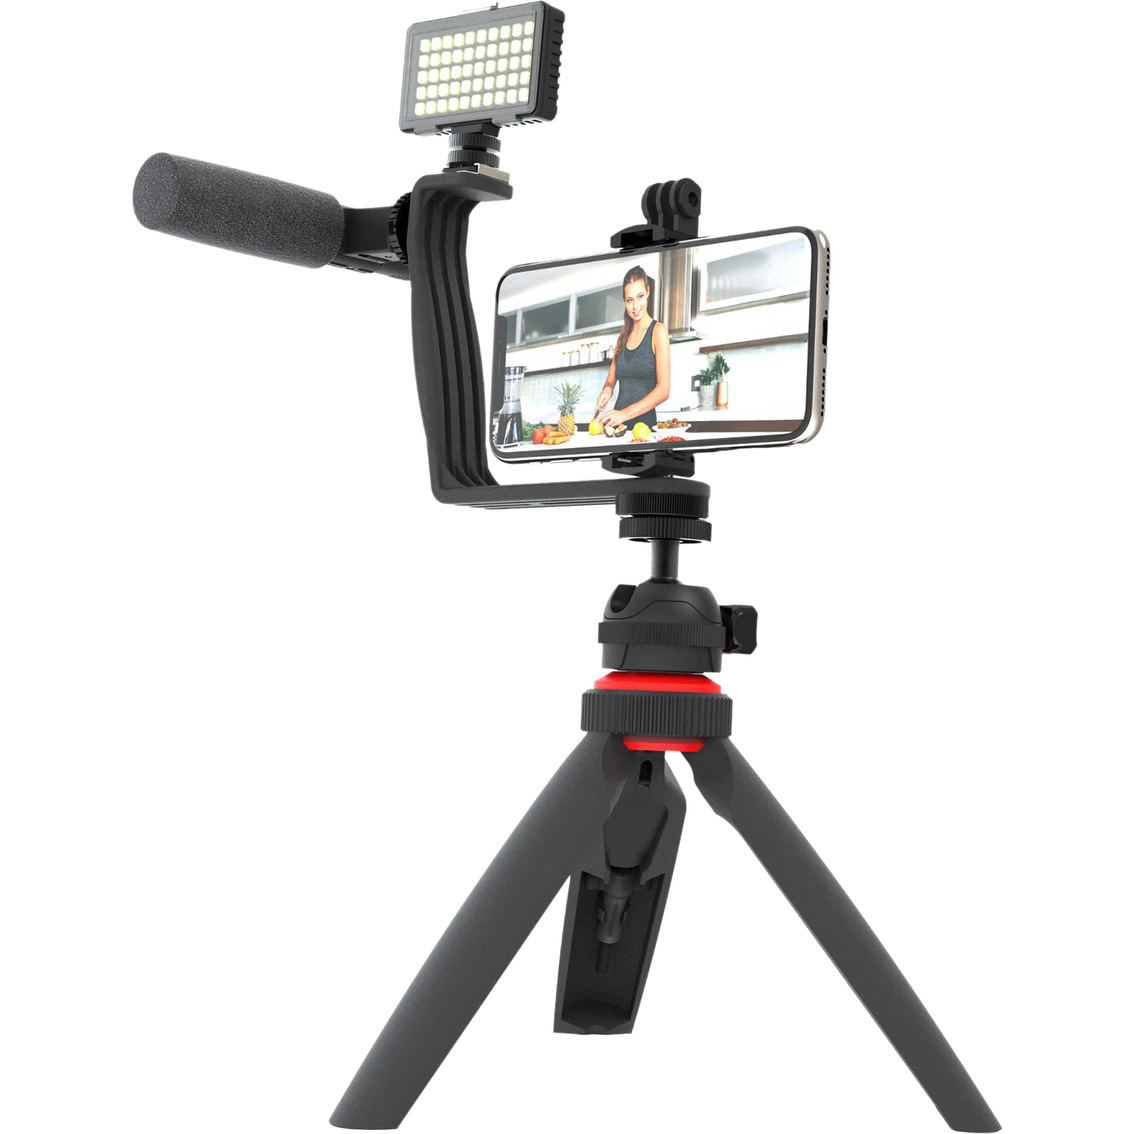 Digipower Content Maker Essential Vlogging Kit - Image 2 of 4